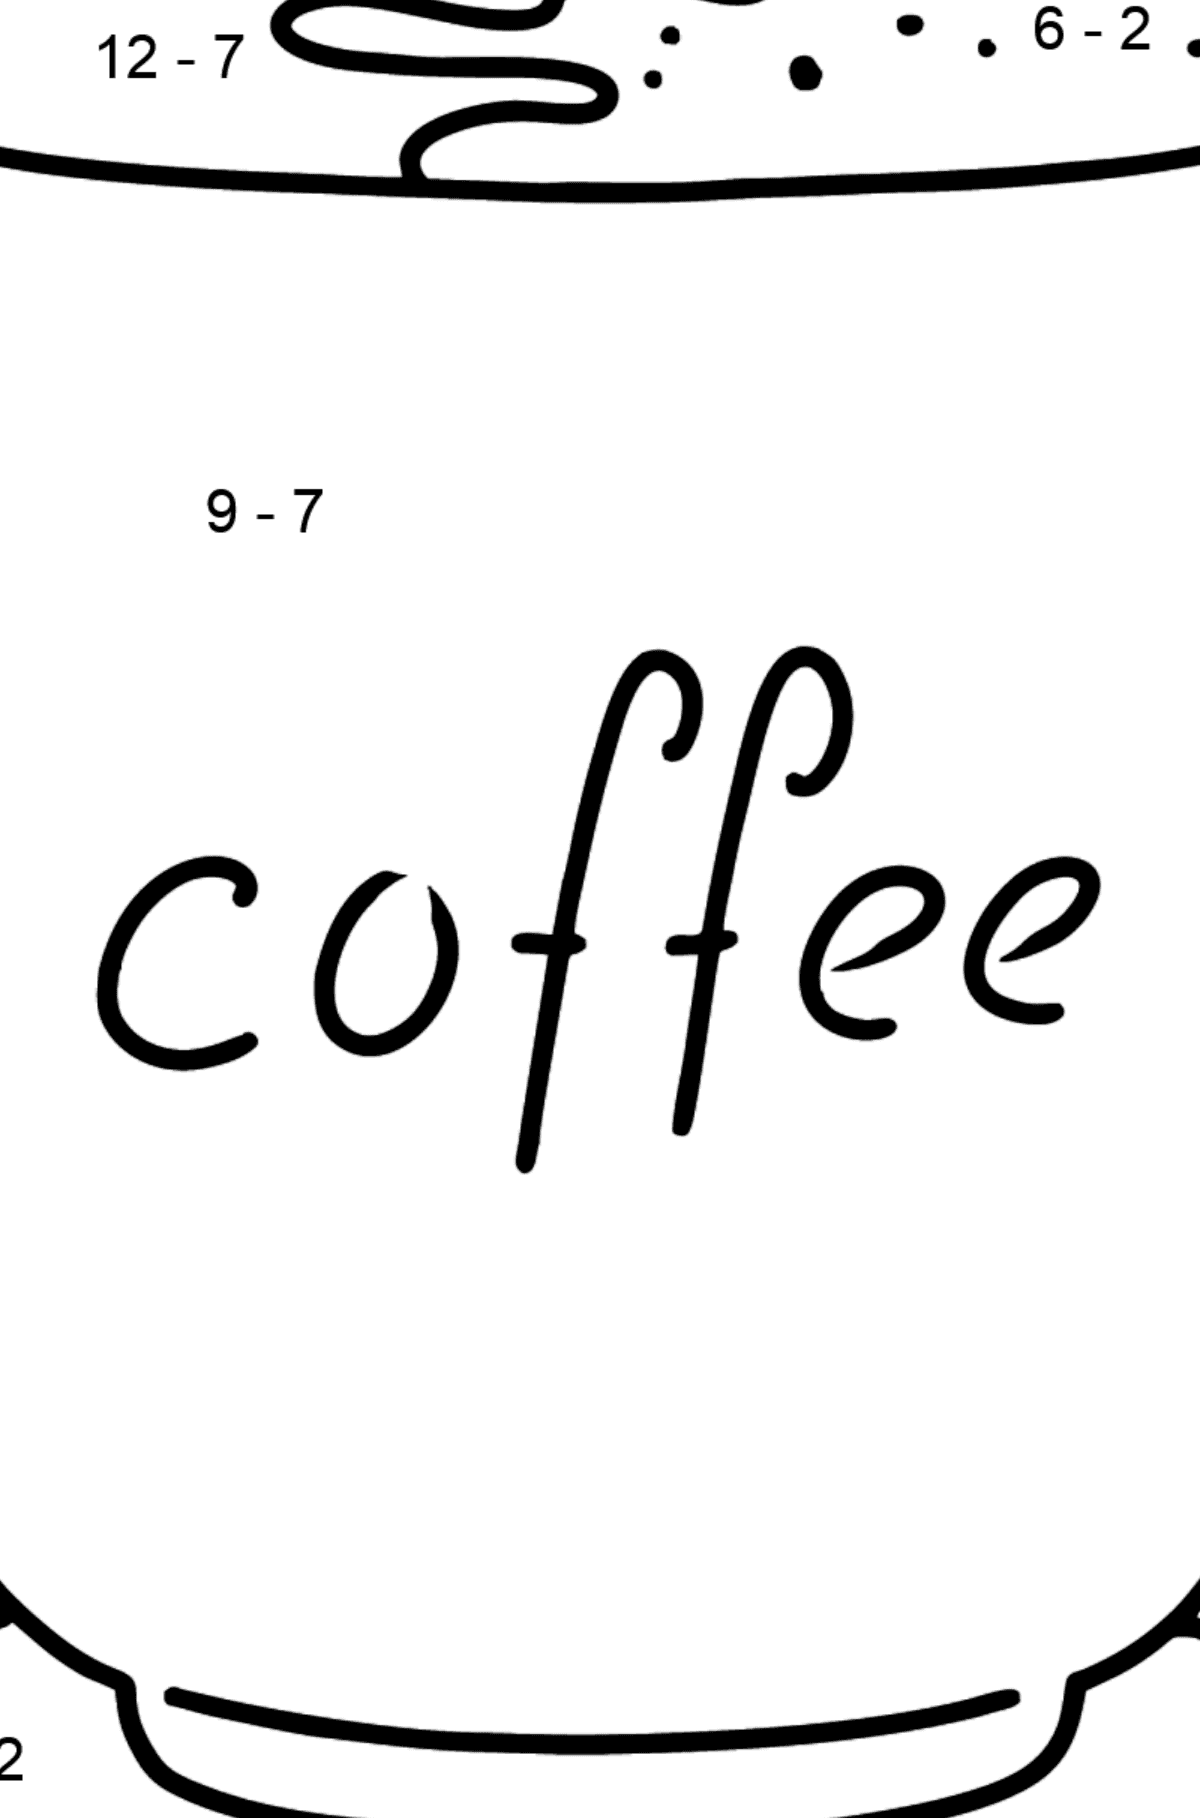 Coffee coloring page - Math Coloring - Subtraction for Kids